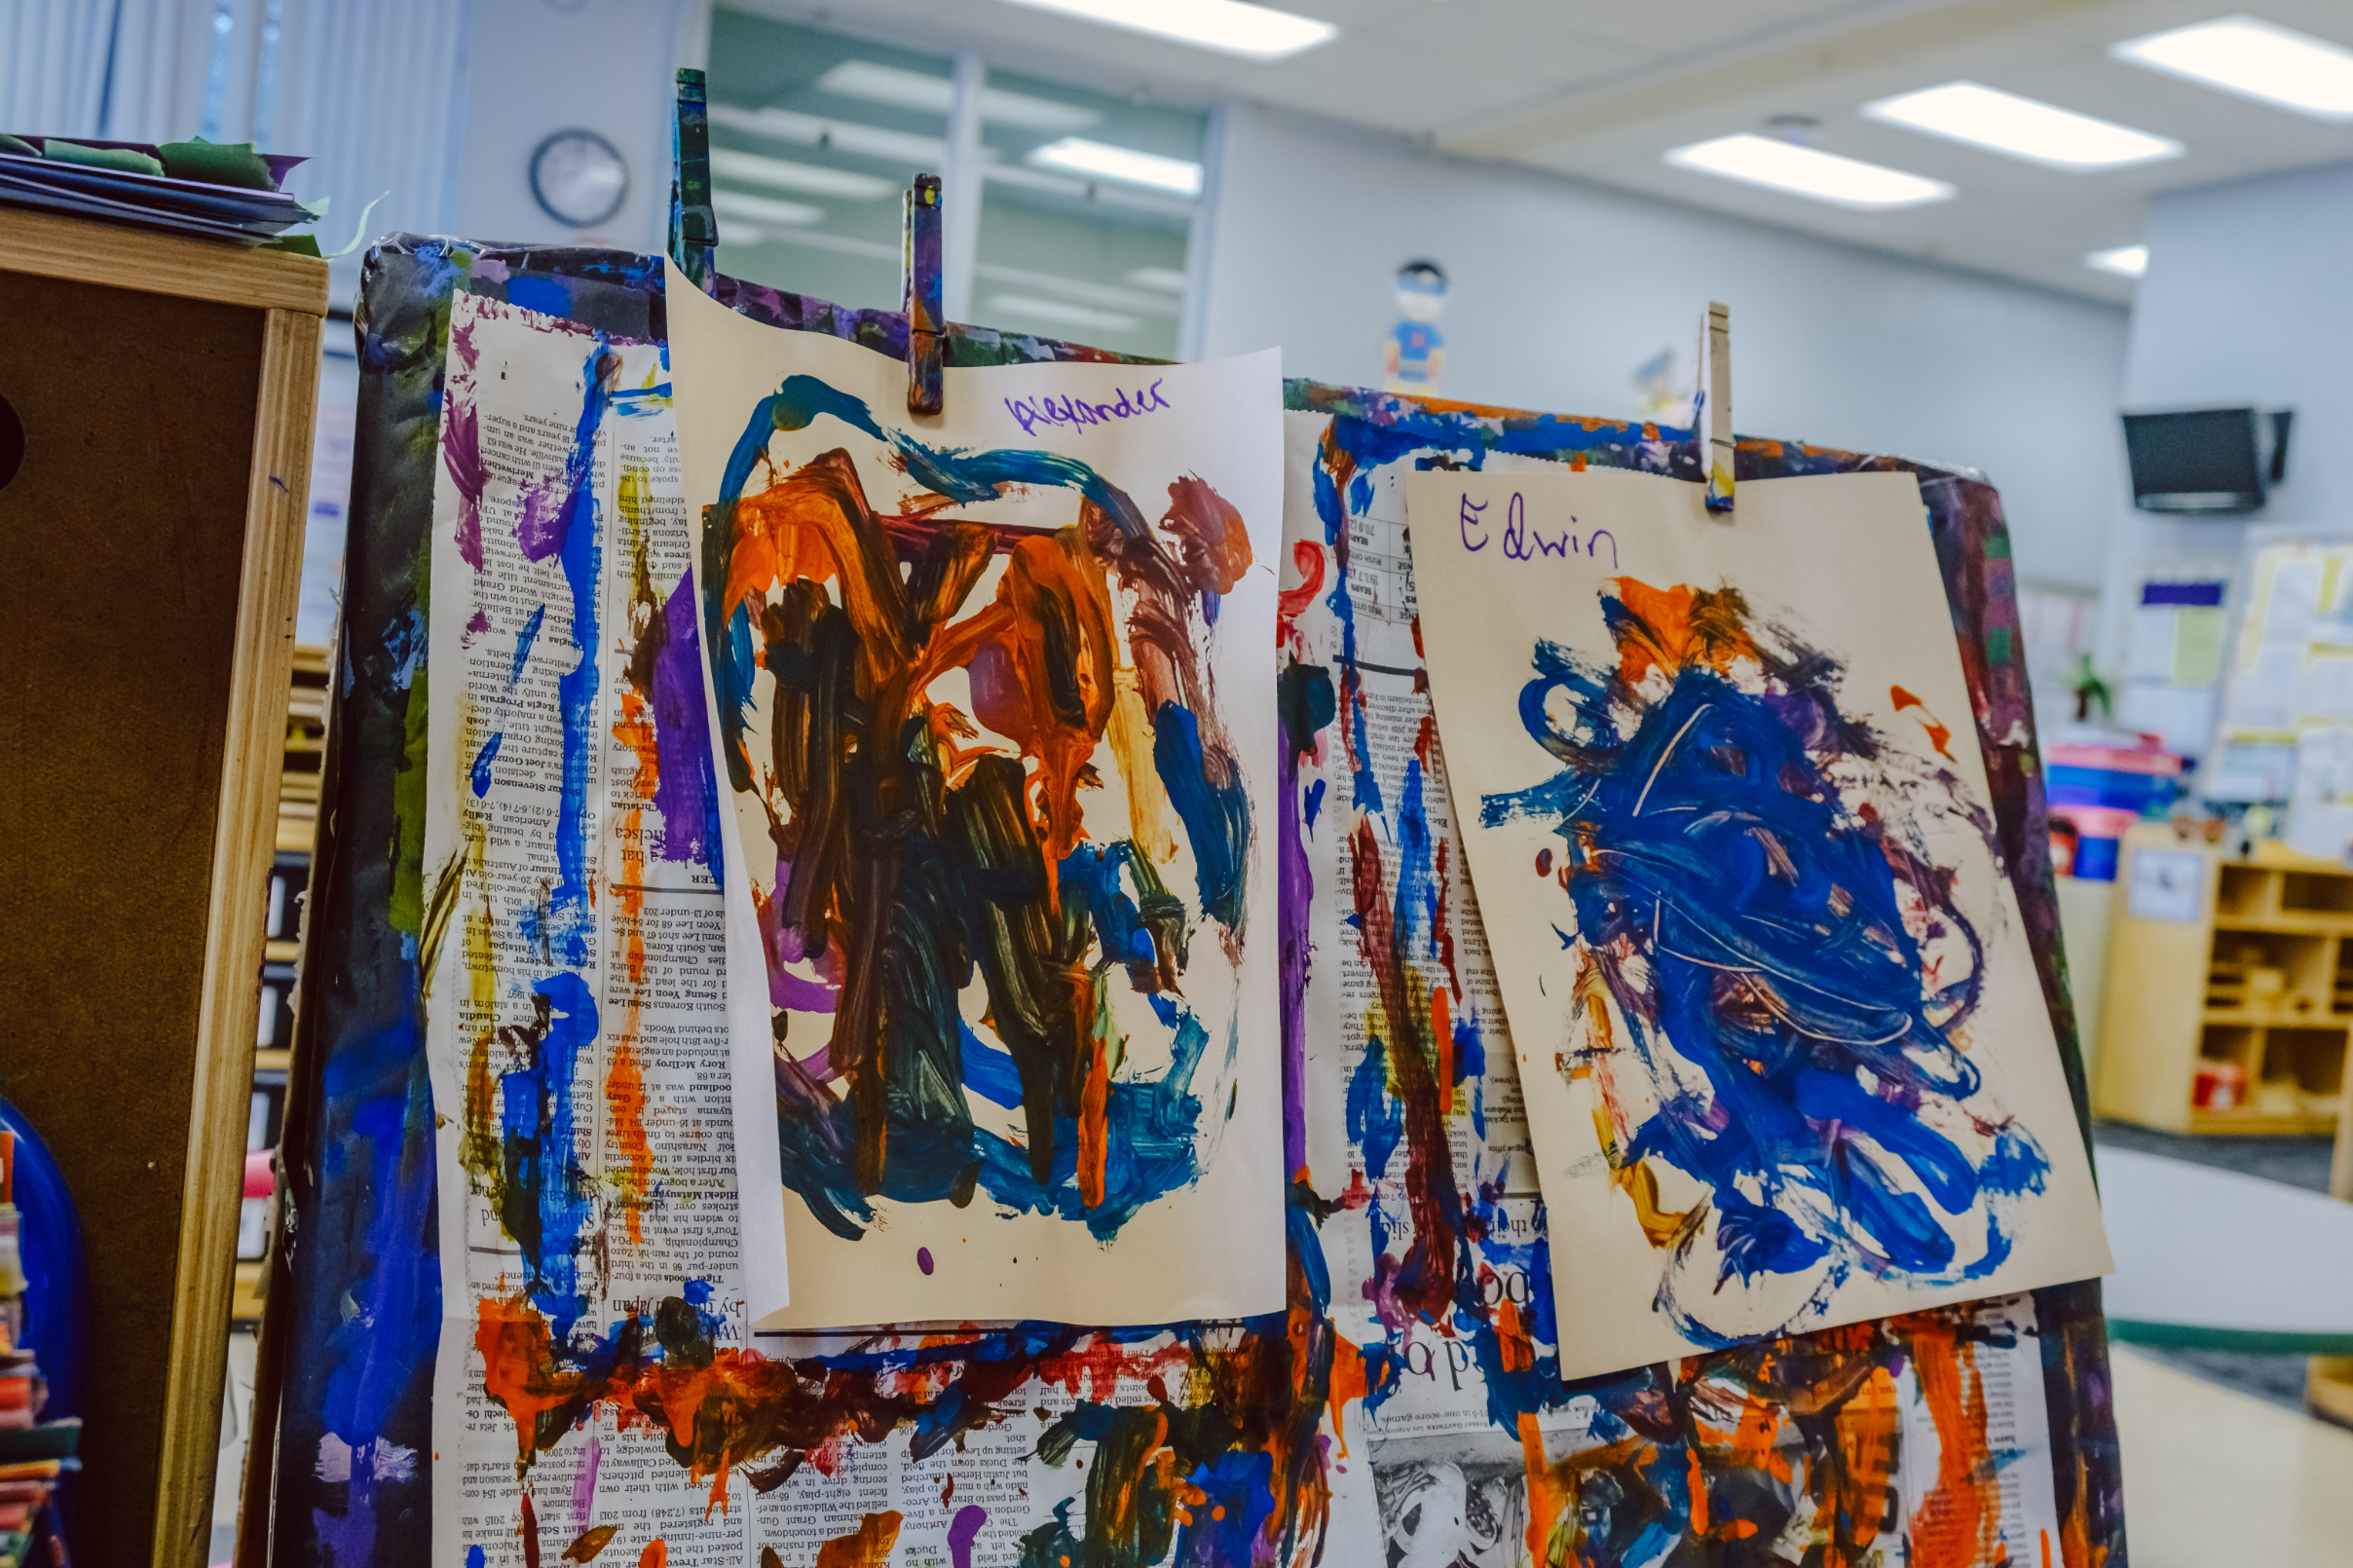 Paint-covered easels display the works of two students at the Pacific Avenue Education Center in Glendale. (Chava Sanchez/LAist)